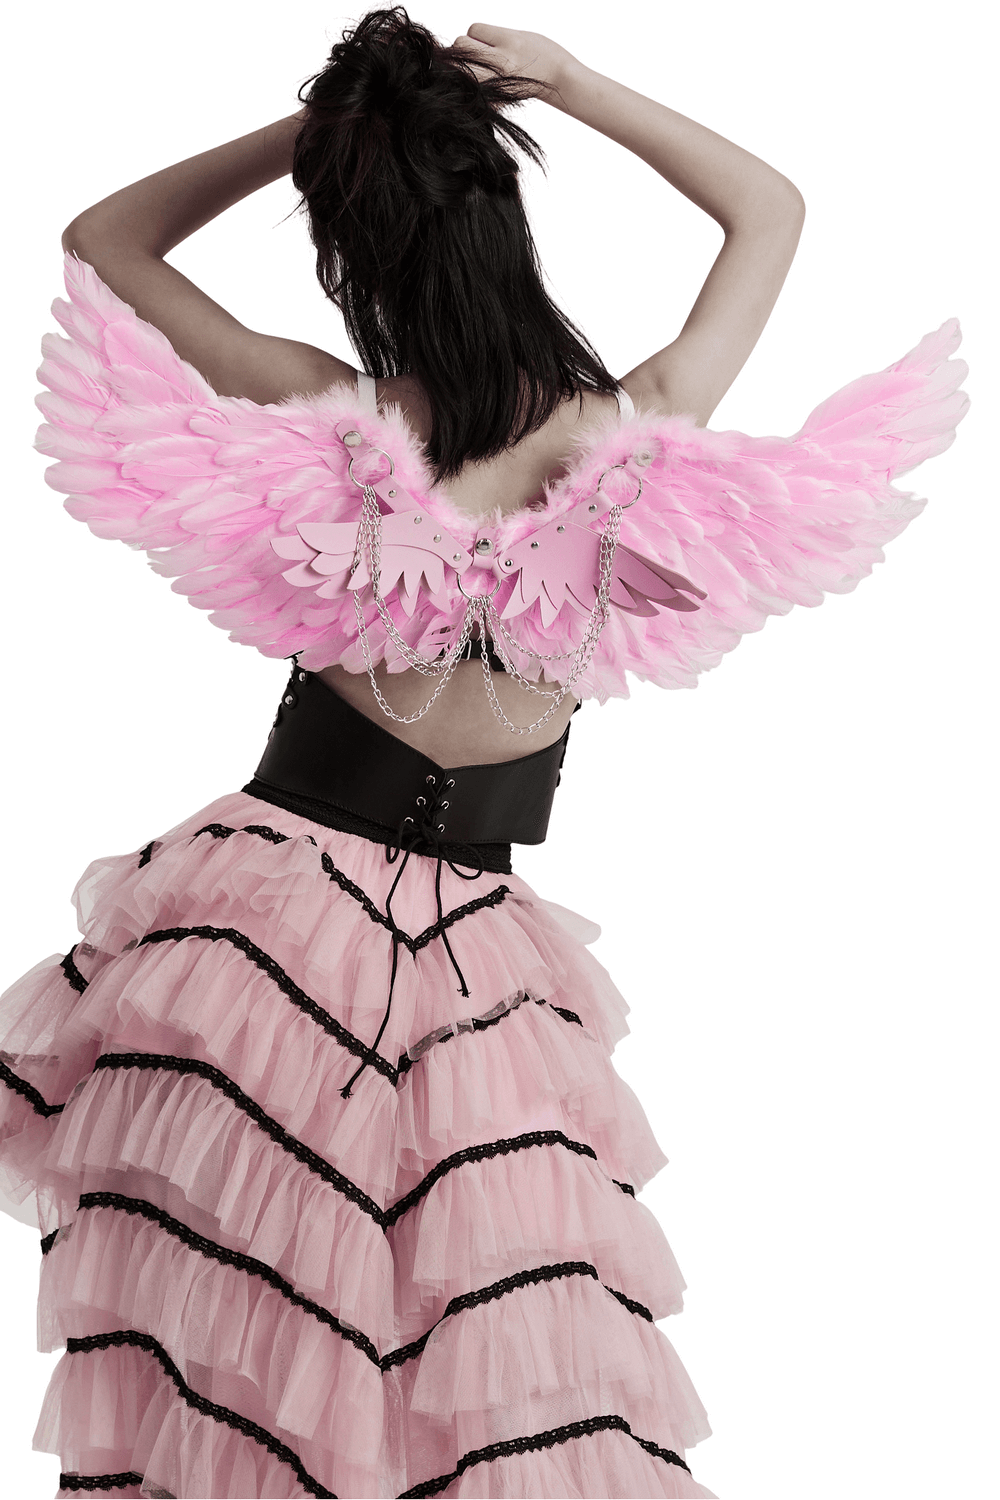 Chic Pink Angel Wings with Silver Chains Harness